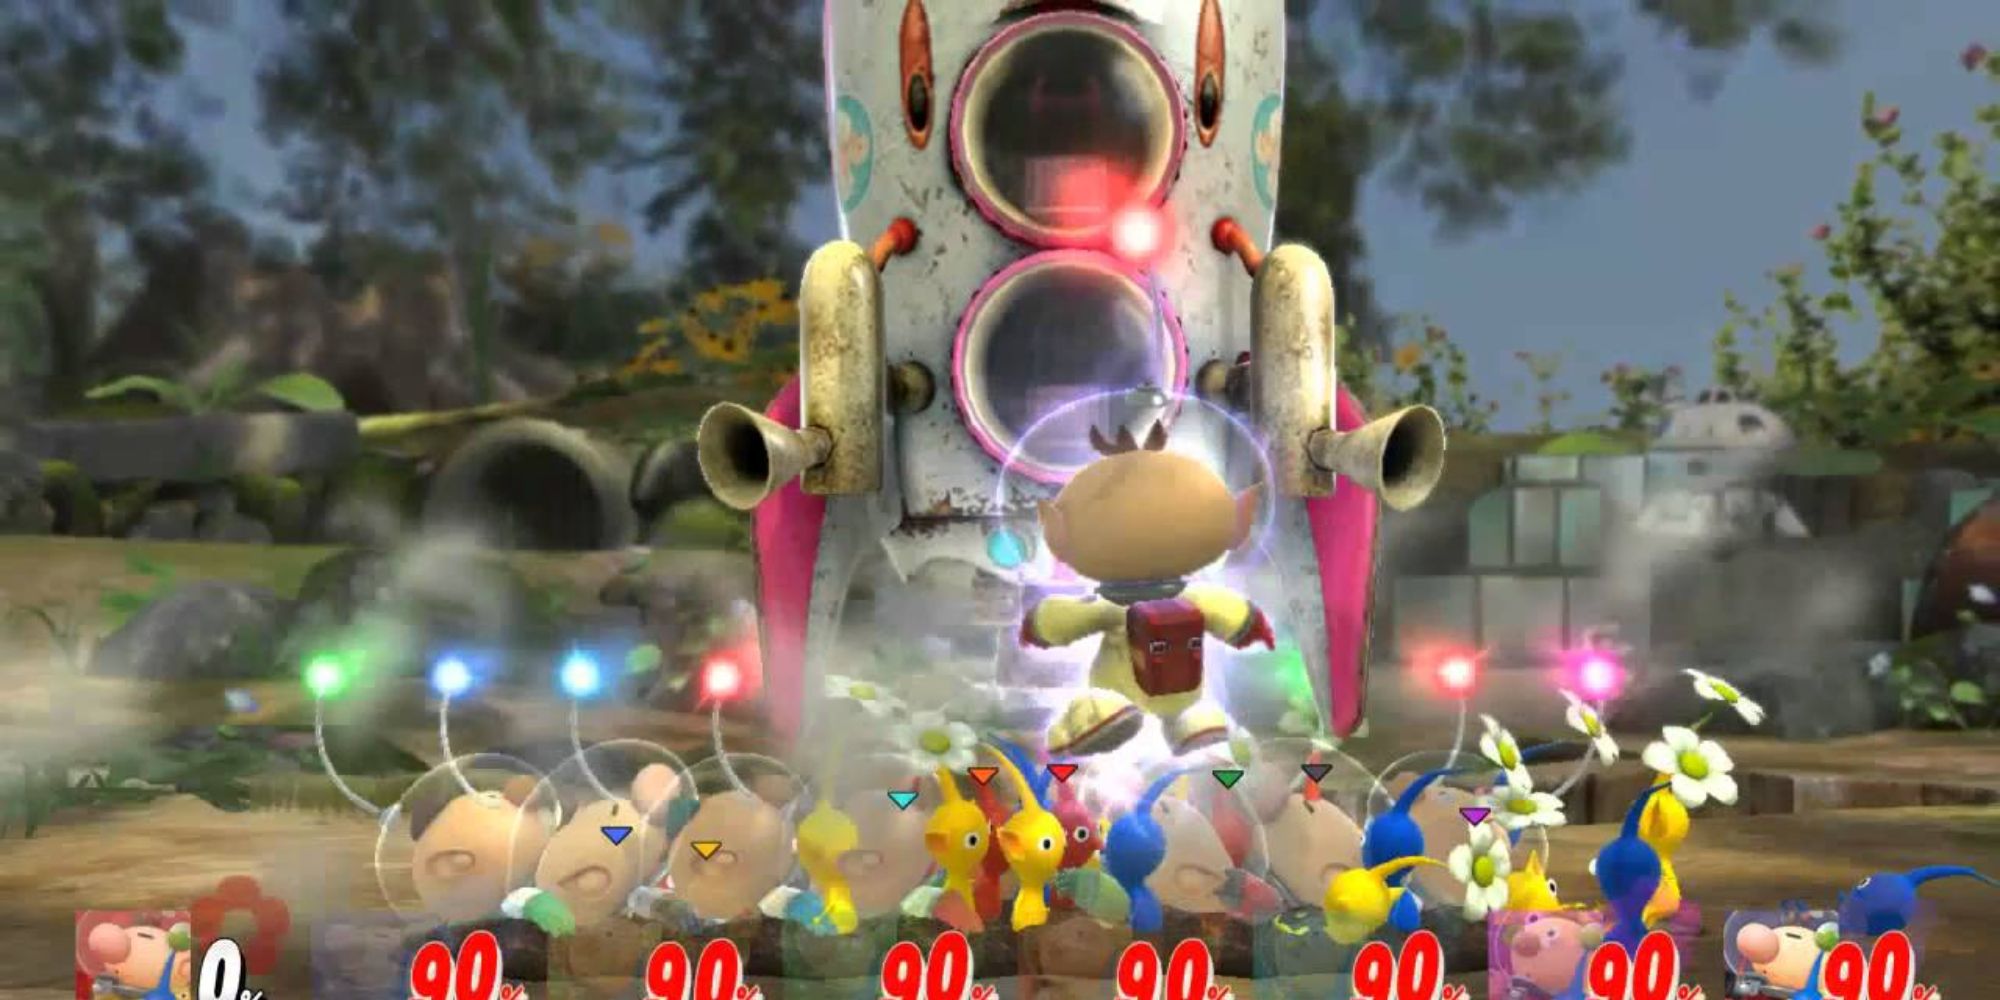 Olimar boarding a starship while other Olimar stay buried